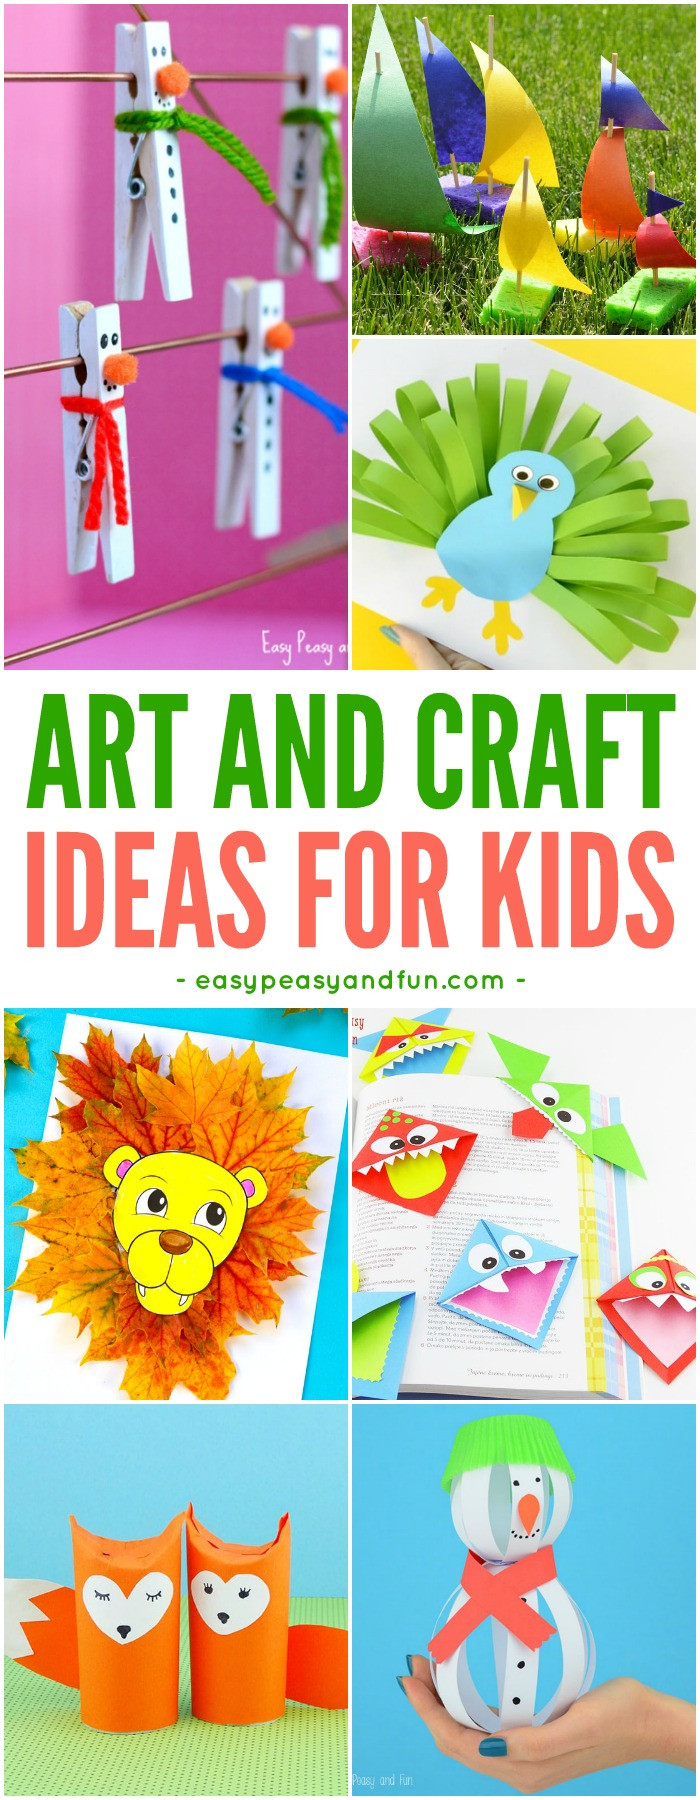 Fun Art For Kids
 Crafts For Kids Tons of Art and Craft Ideas for Kids to